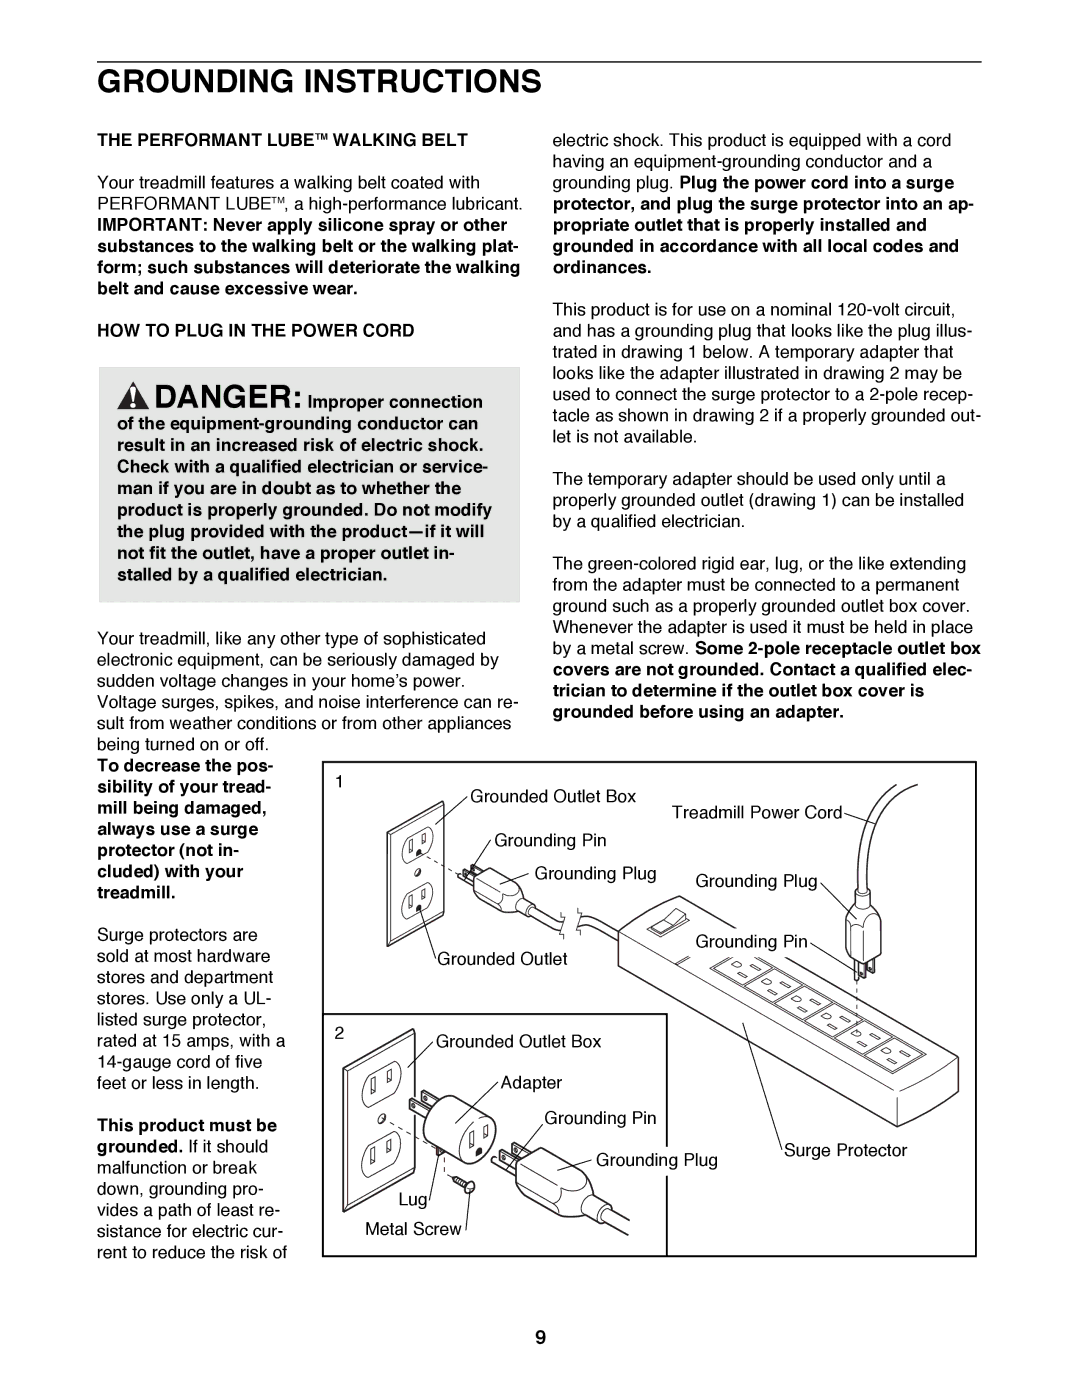 ProForm 785 TL user manual Grounding Instructions, Performant Lubetm Walking Belt, HOW to Plug in the Power Cord 